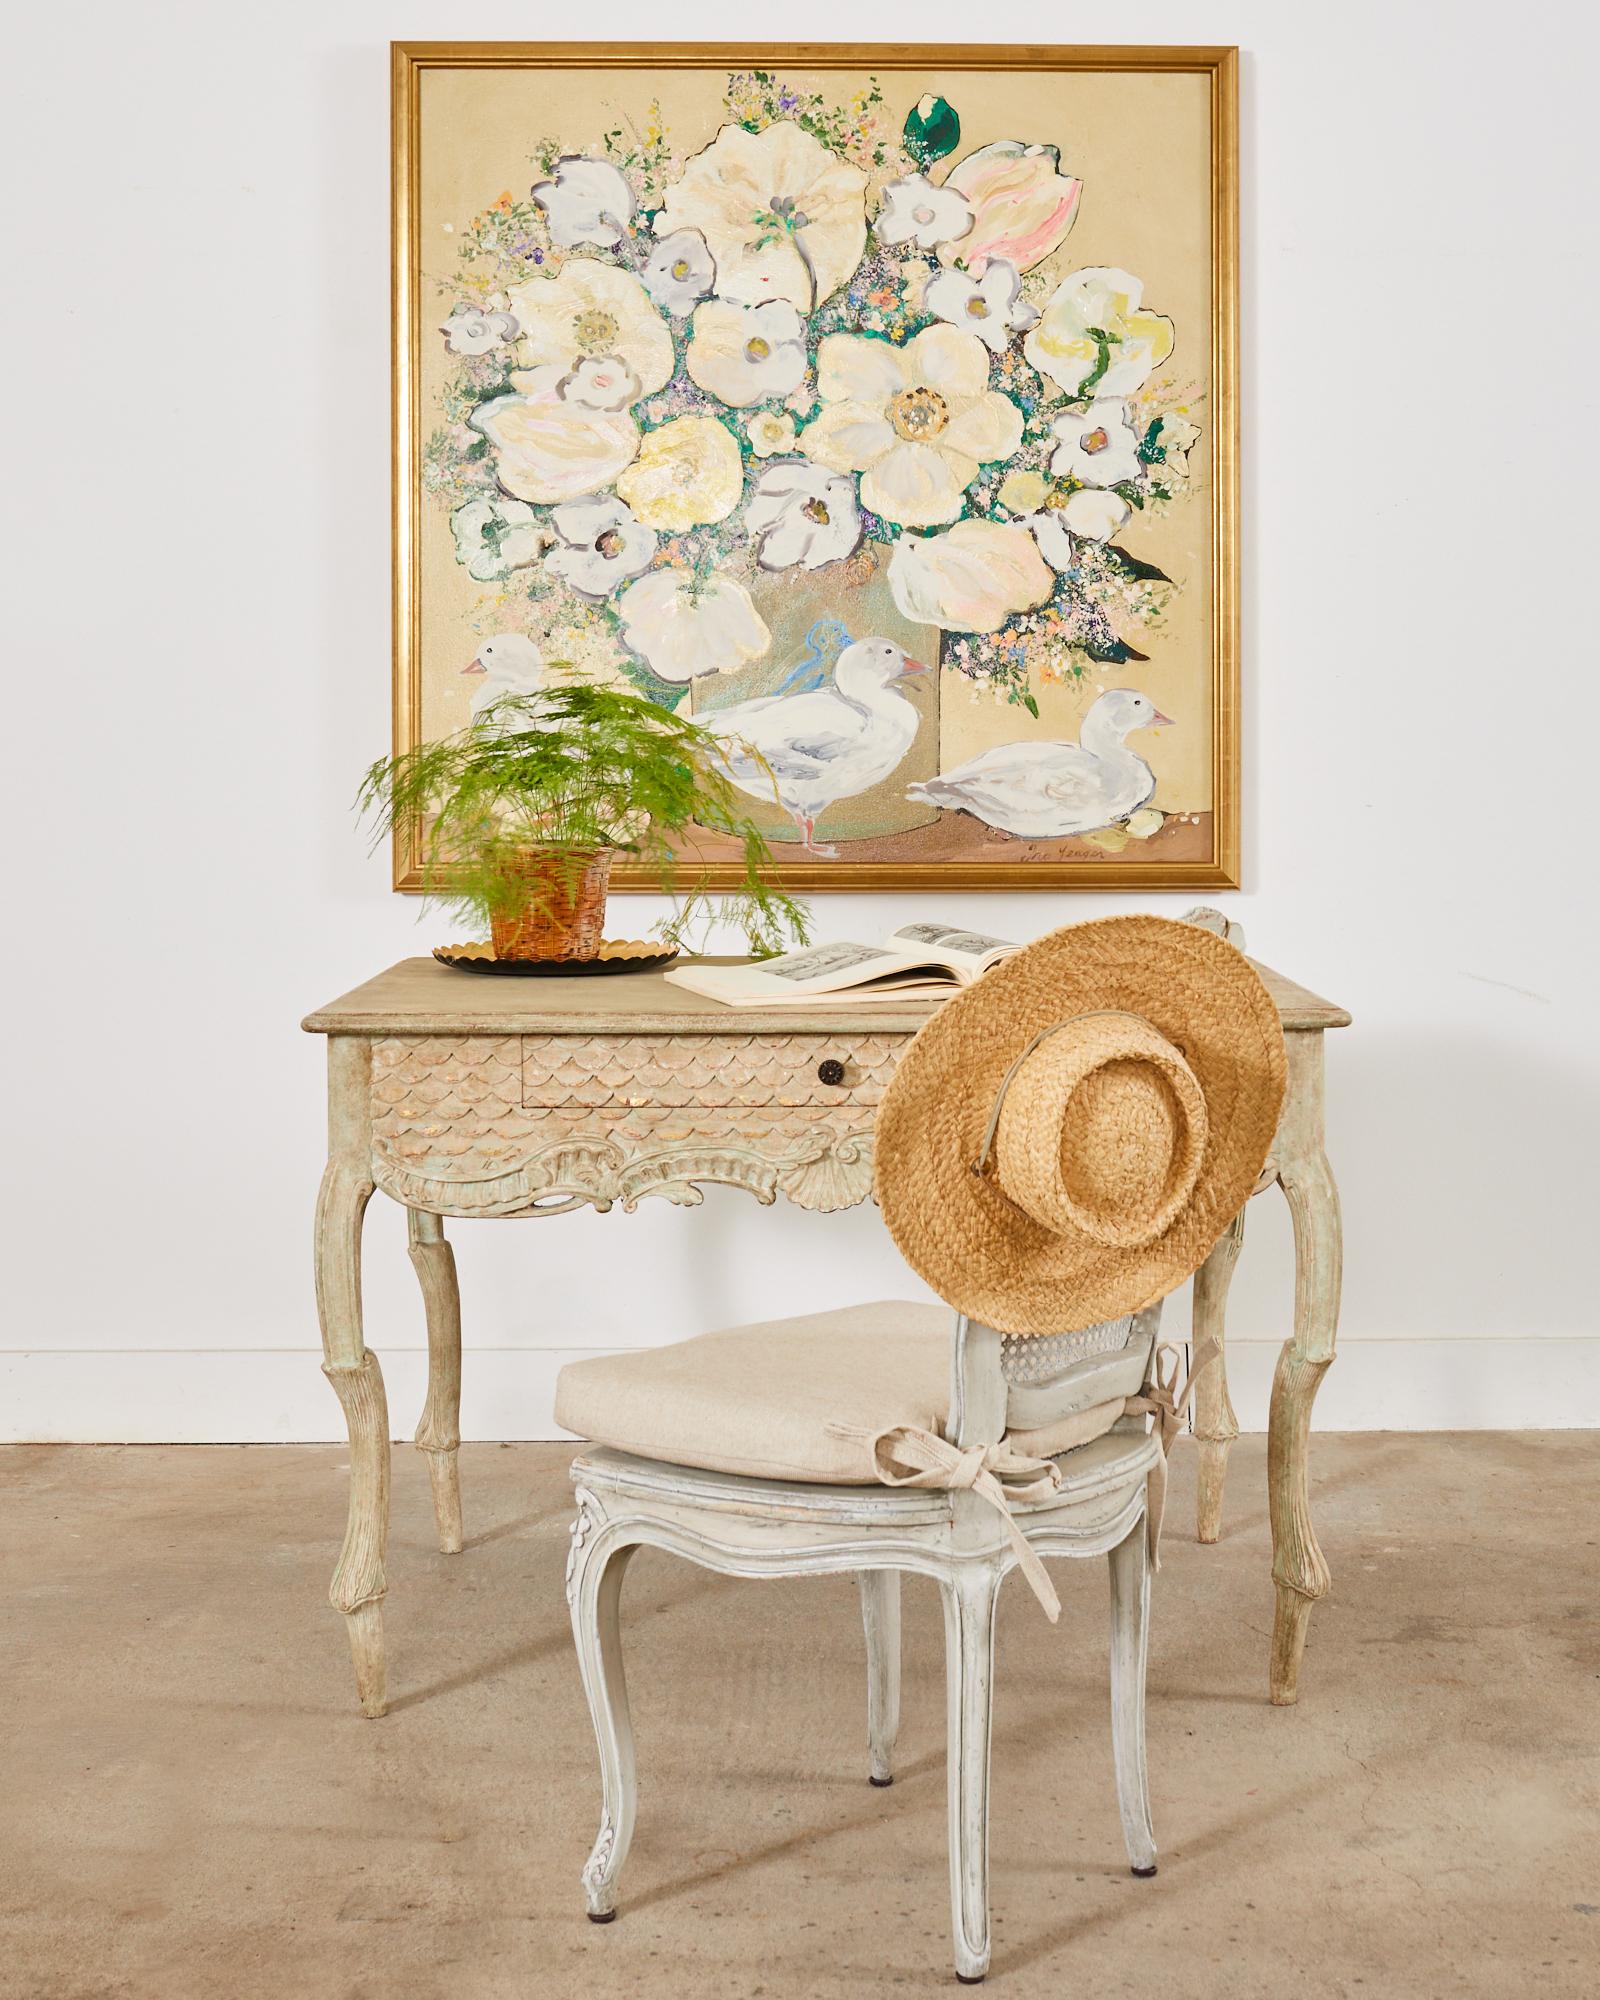 Large floral still life painting by artist Ira Yeager (American 1938-2022). The canvas painting features a grey vase with a magnificent floral bouquet and three white ducks in Yeager's whimsical style. The canvas is set in a 22k gold leaf